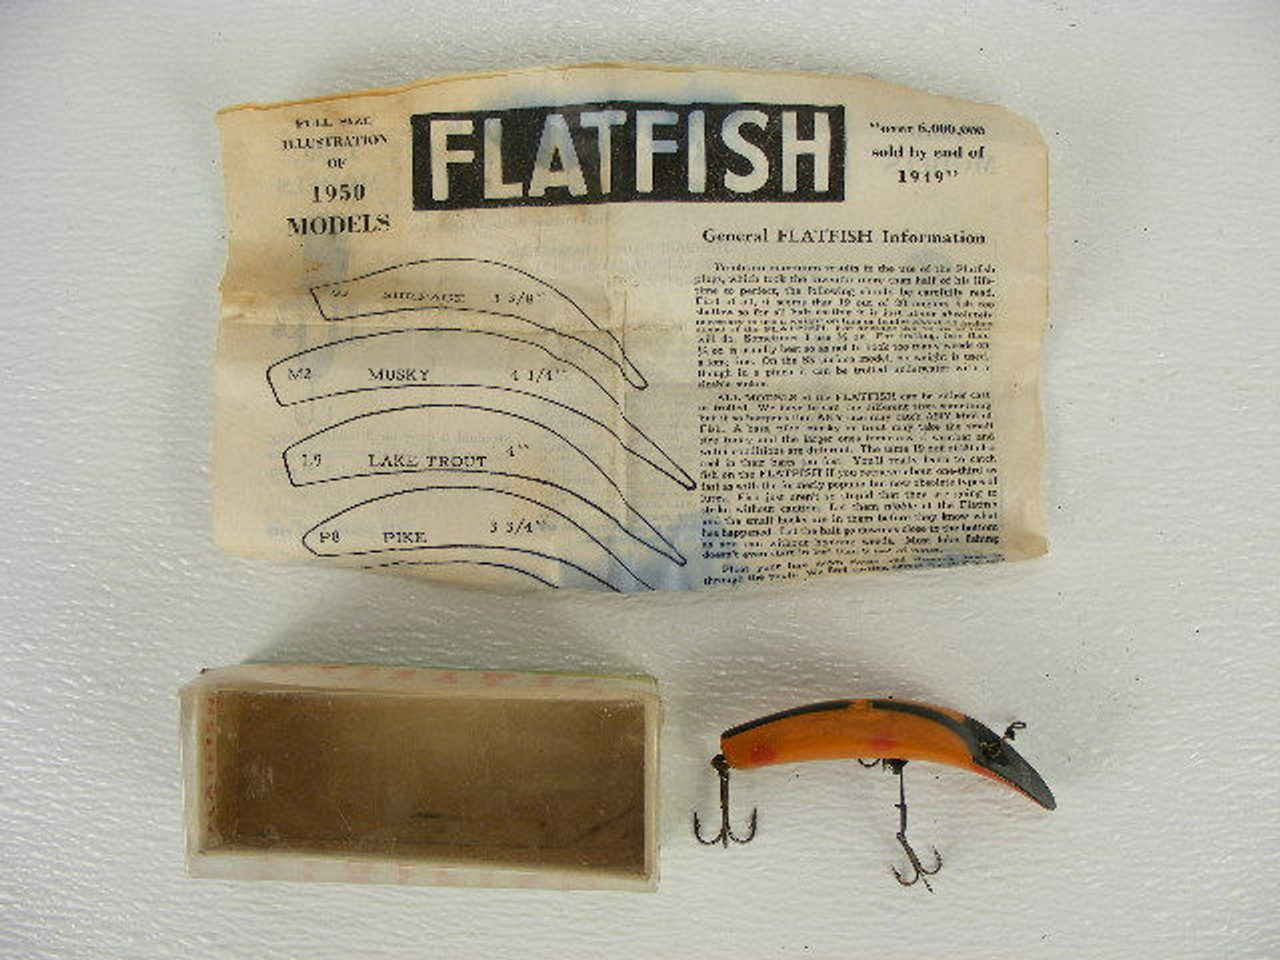 A vintage Flatfish lure in the original box from 1950.